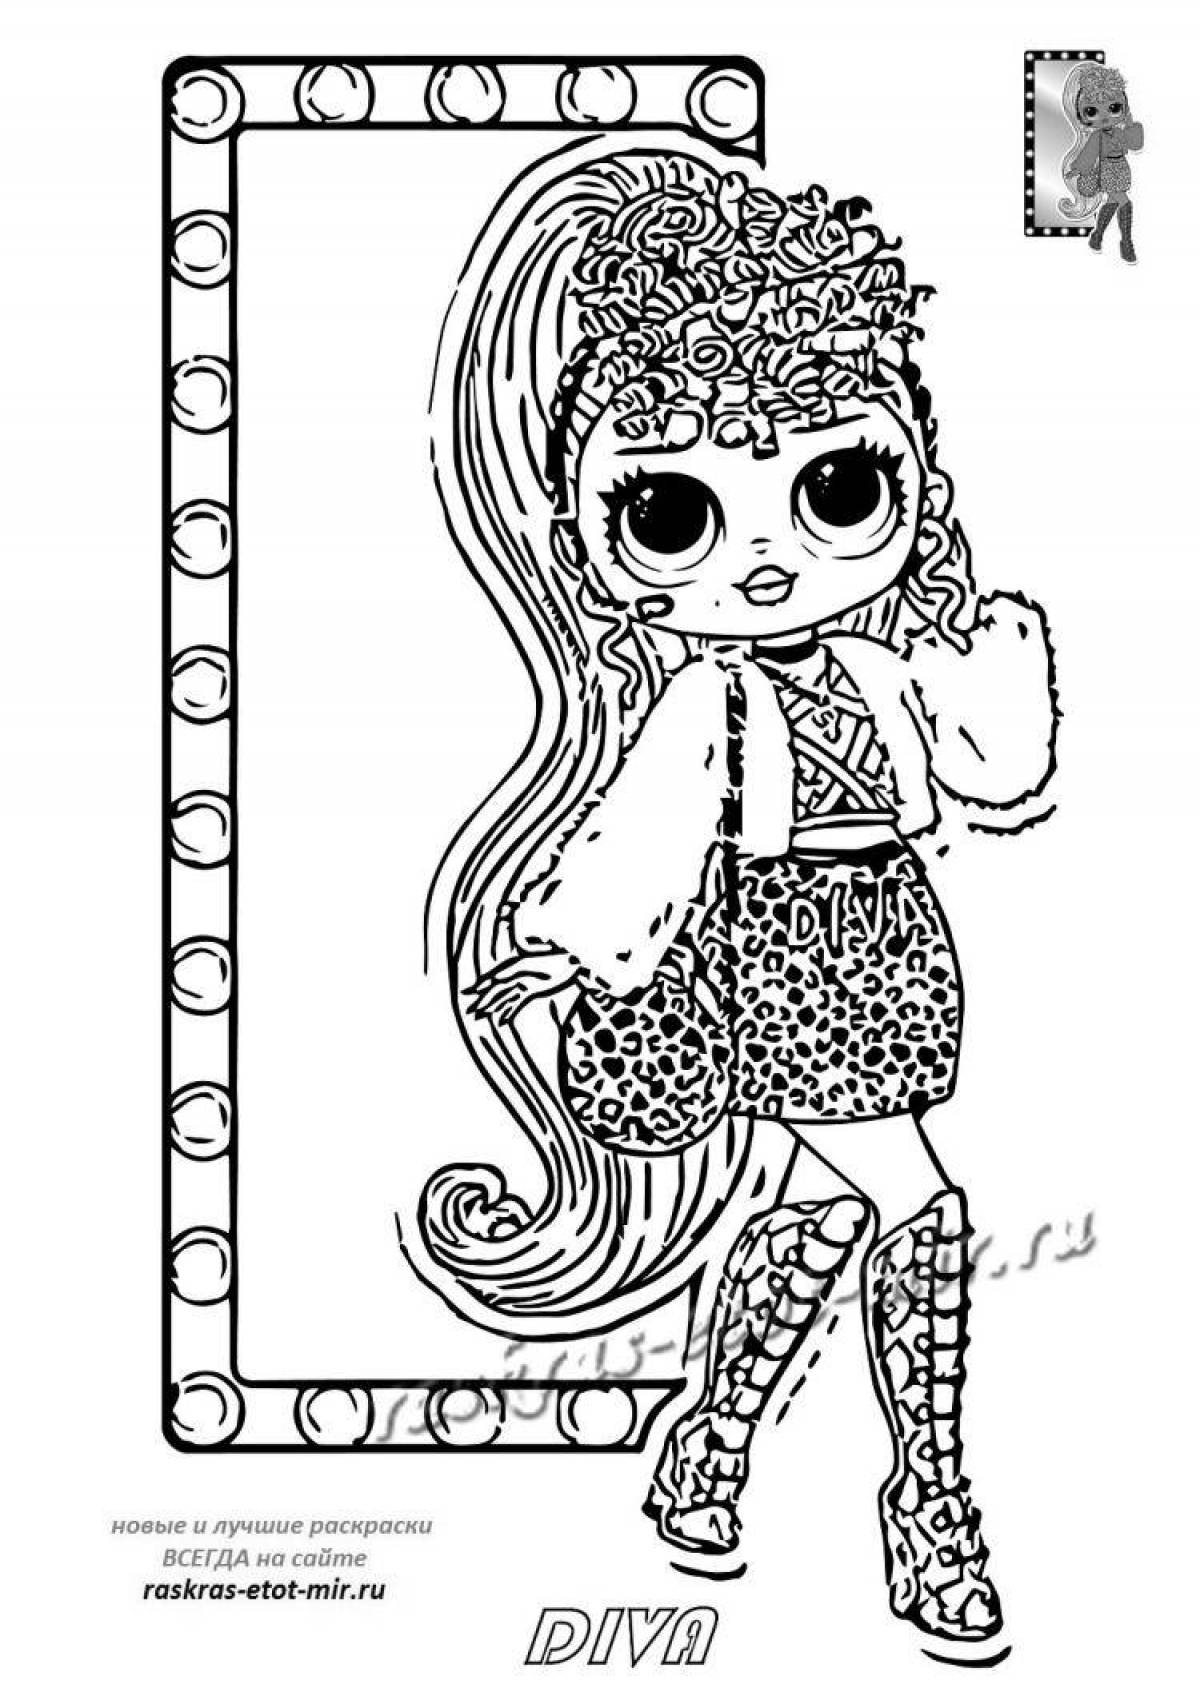 Adorable lol diva coloring doll